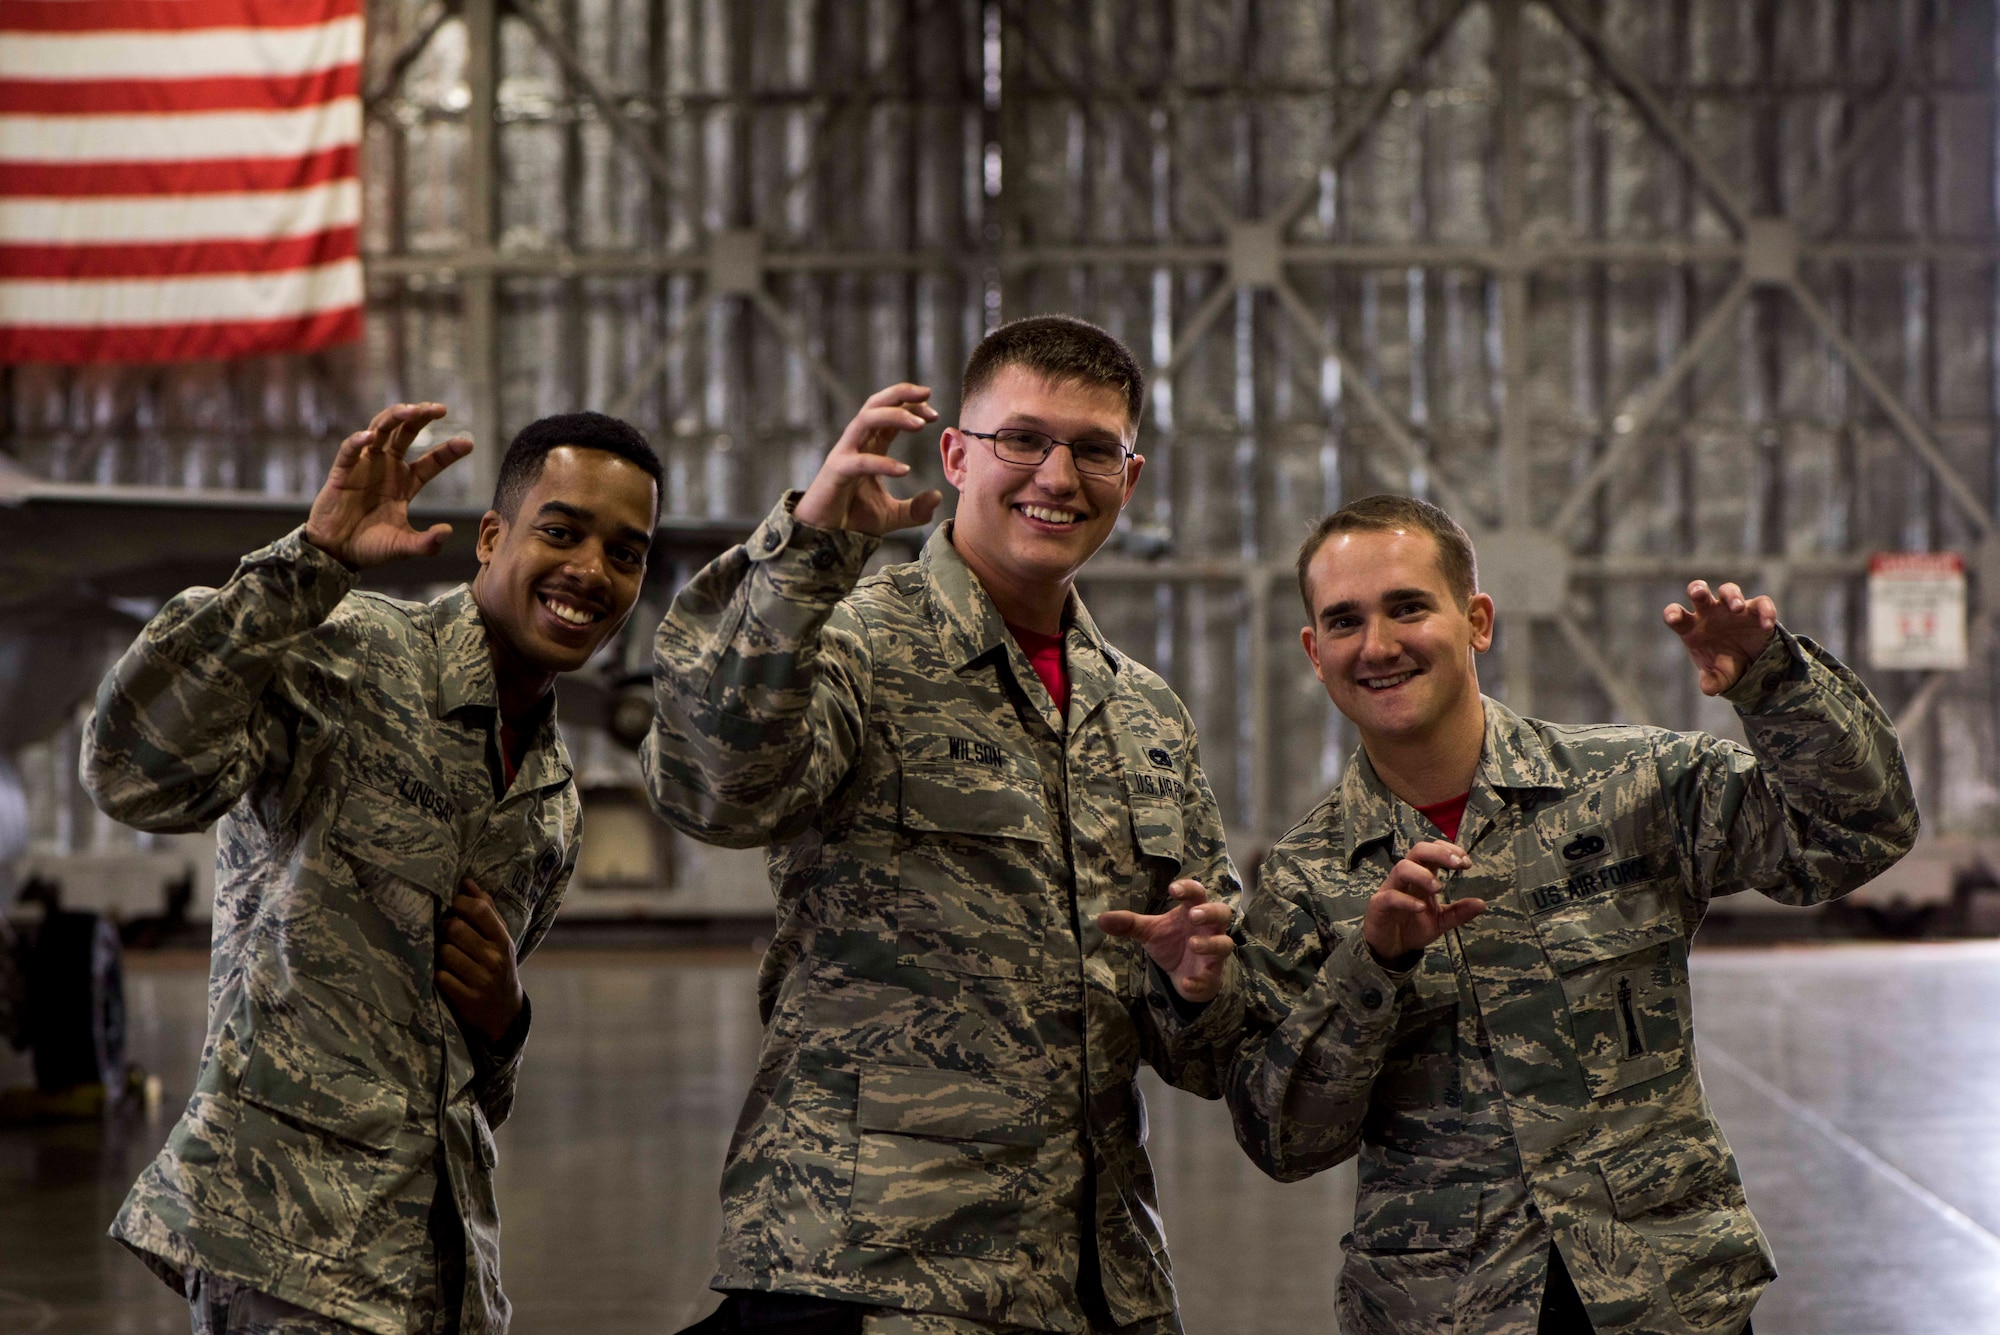 U.S. Air Force Senior Airman Travonne Lindsay, left, and Airman 1st Class Cody Wilson, center, both weapons load crew members, and Staff Sgt. Branden Goodrich, a load crew team chief, all with the 13th Aircraft Maintenance Unit, pose for a photo during the third quarter load competition at Misawa Air Base, Japan, Nov. 9, 2018. During the competition, Airmen raced against the clock to see which team could efficiently and accurately load munitions onto an F-16 Fighting Falcon. (U.S. Air Force photo by Airman 1st Class Collette Brooks)